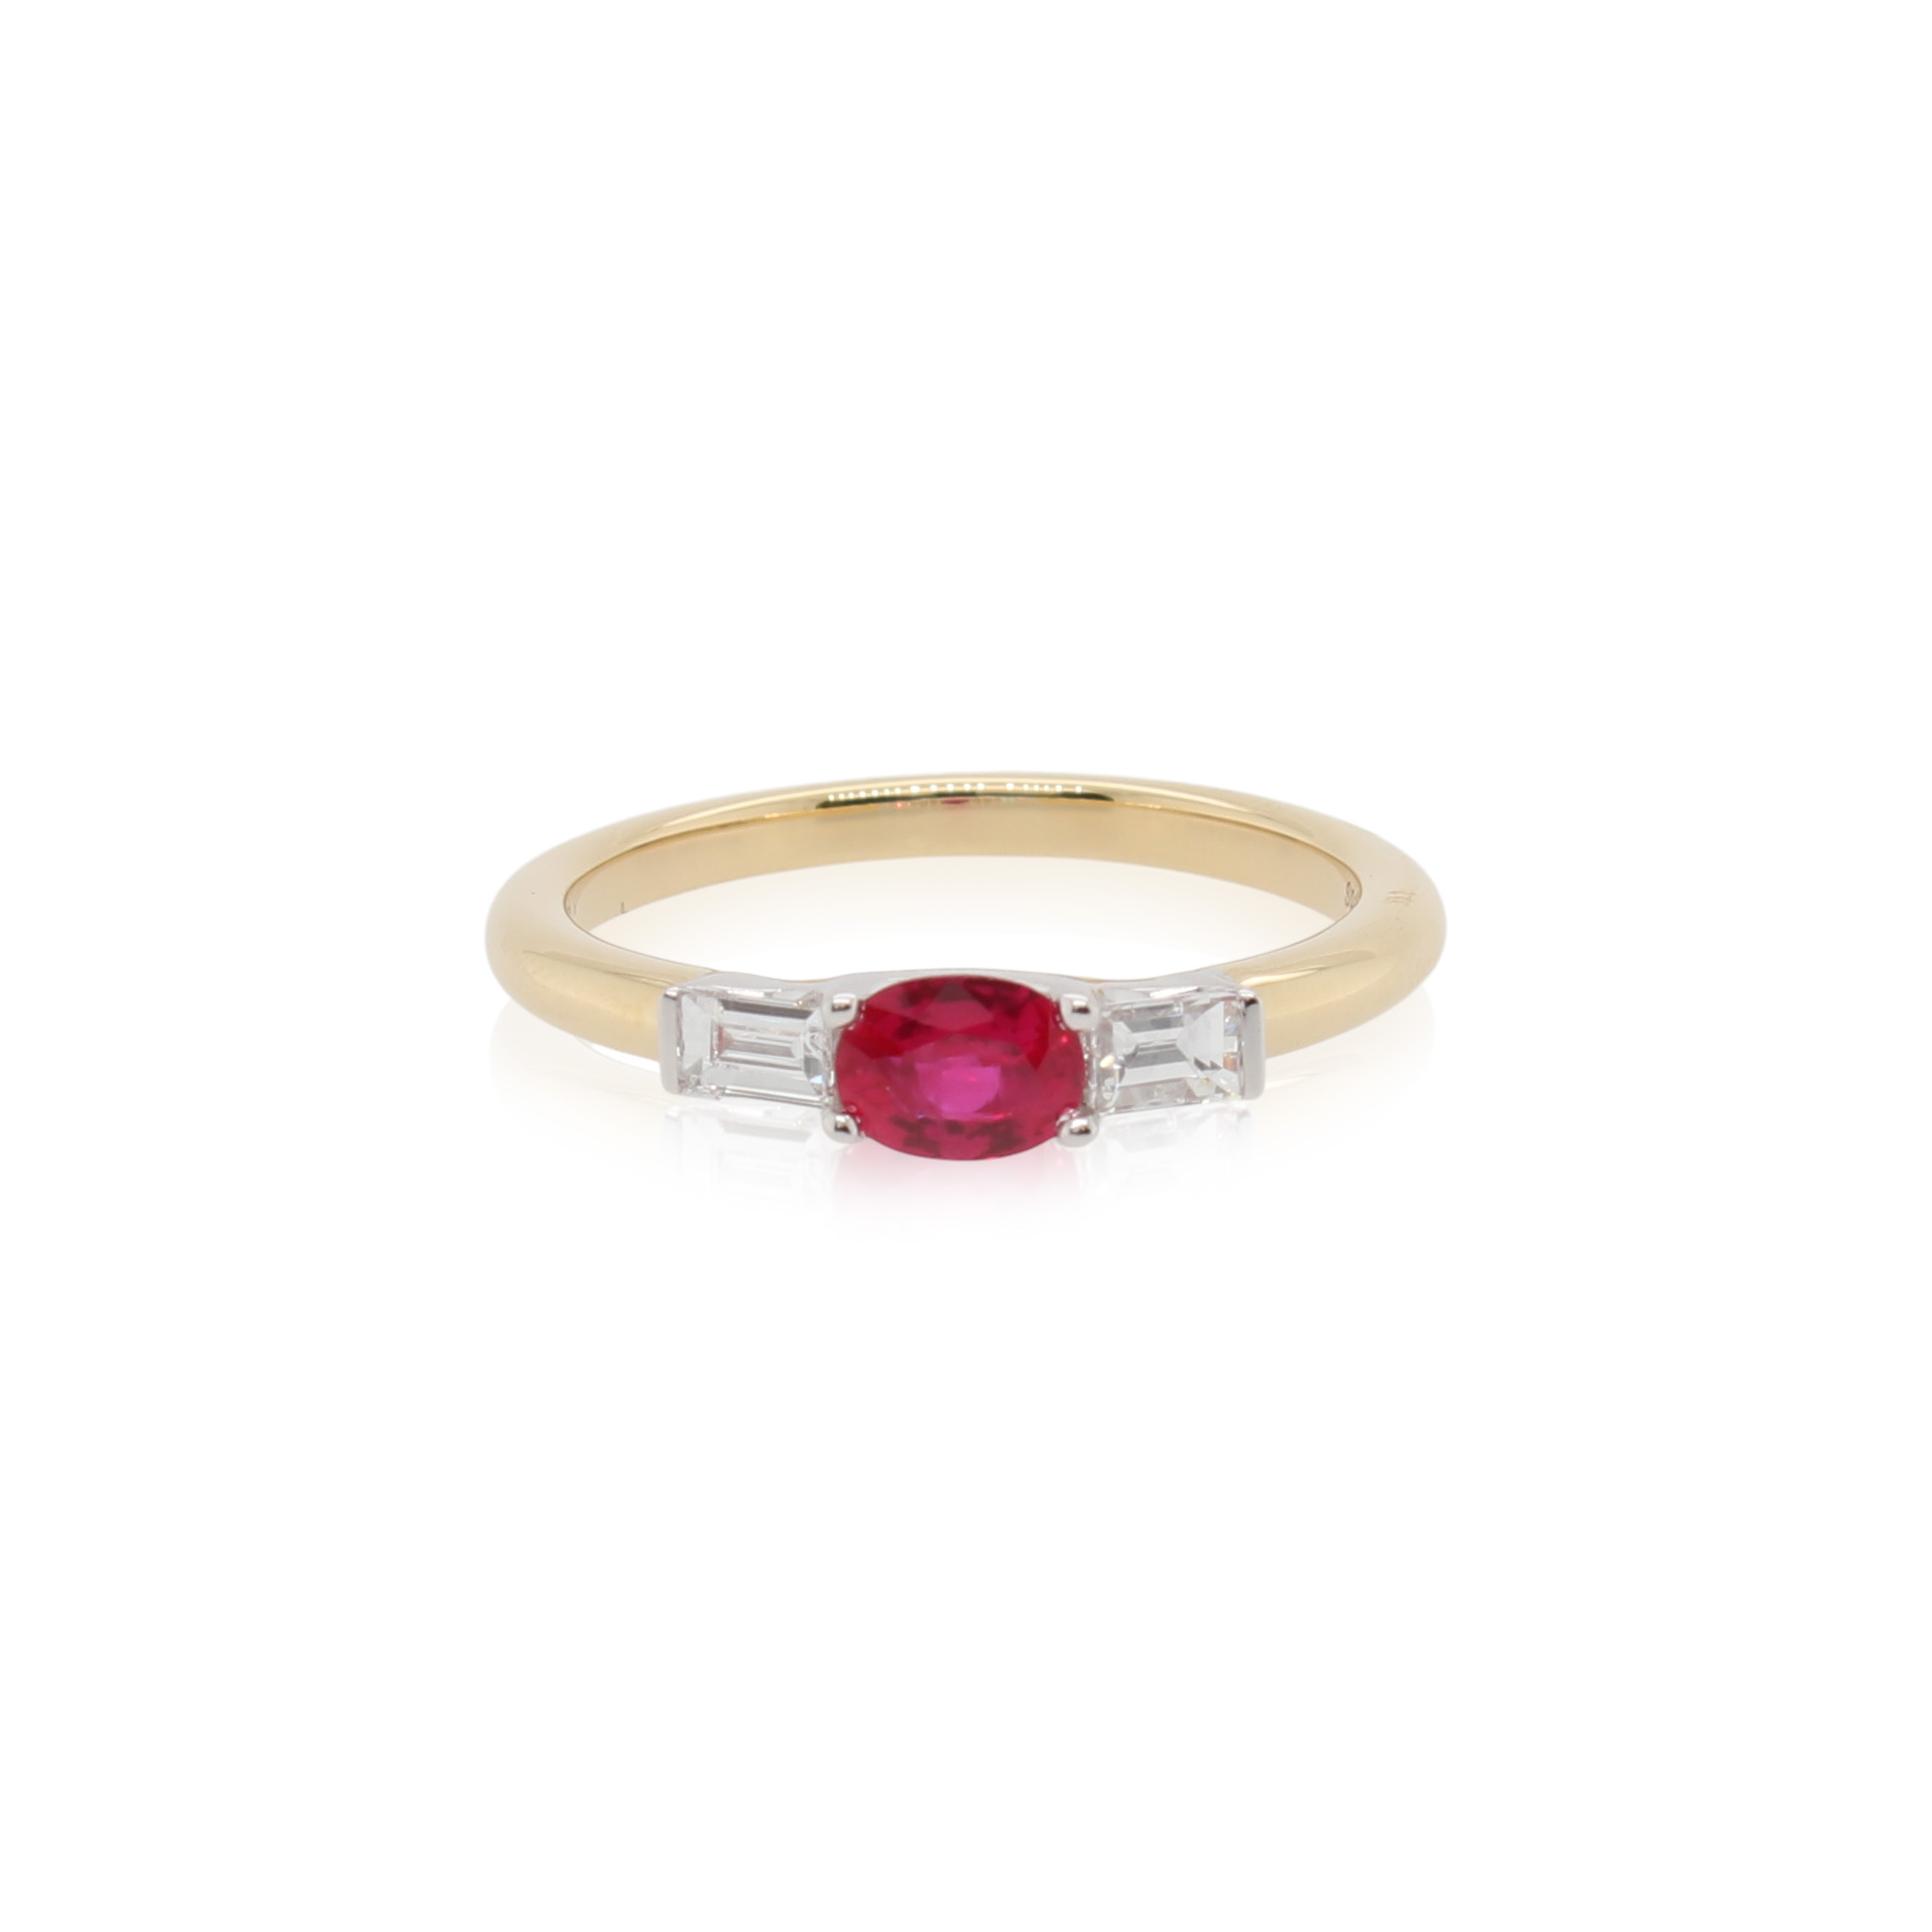 This ring by Spark Creations is crafted from 18k white and yellow gold and features a 0.50 carat oval ruby and 0.23 total carats of emerald cut side diamonds.